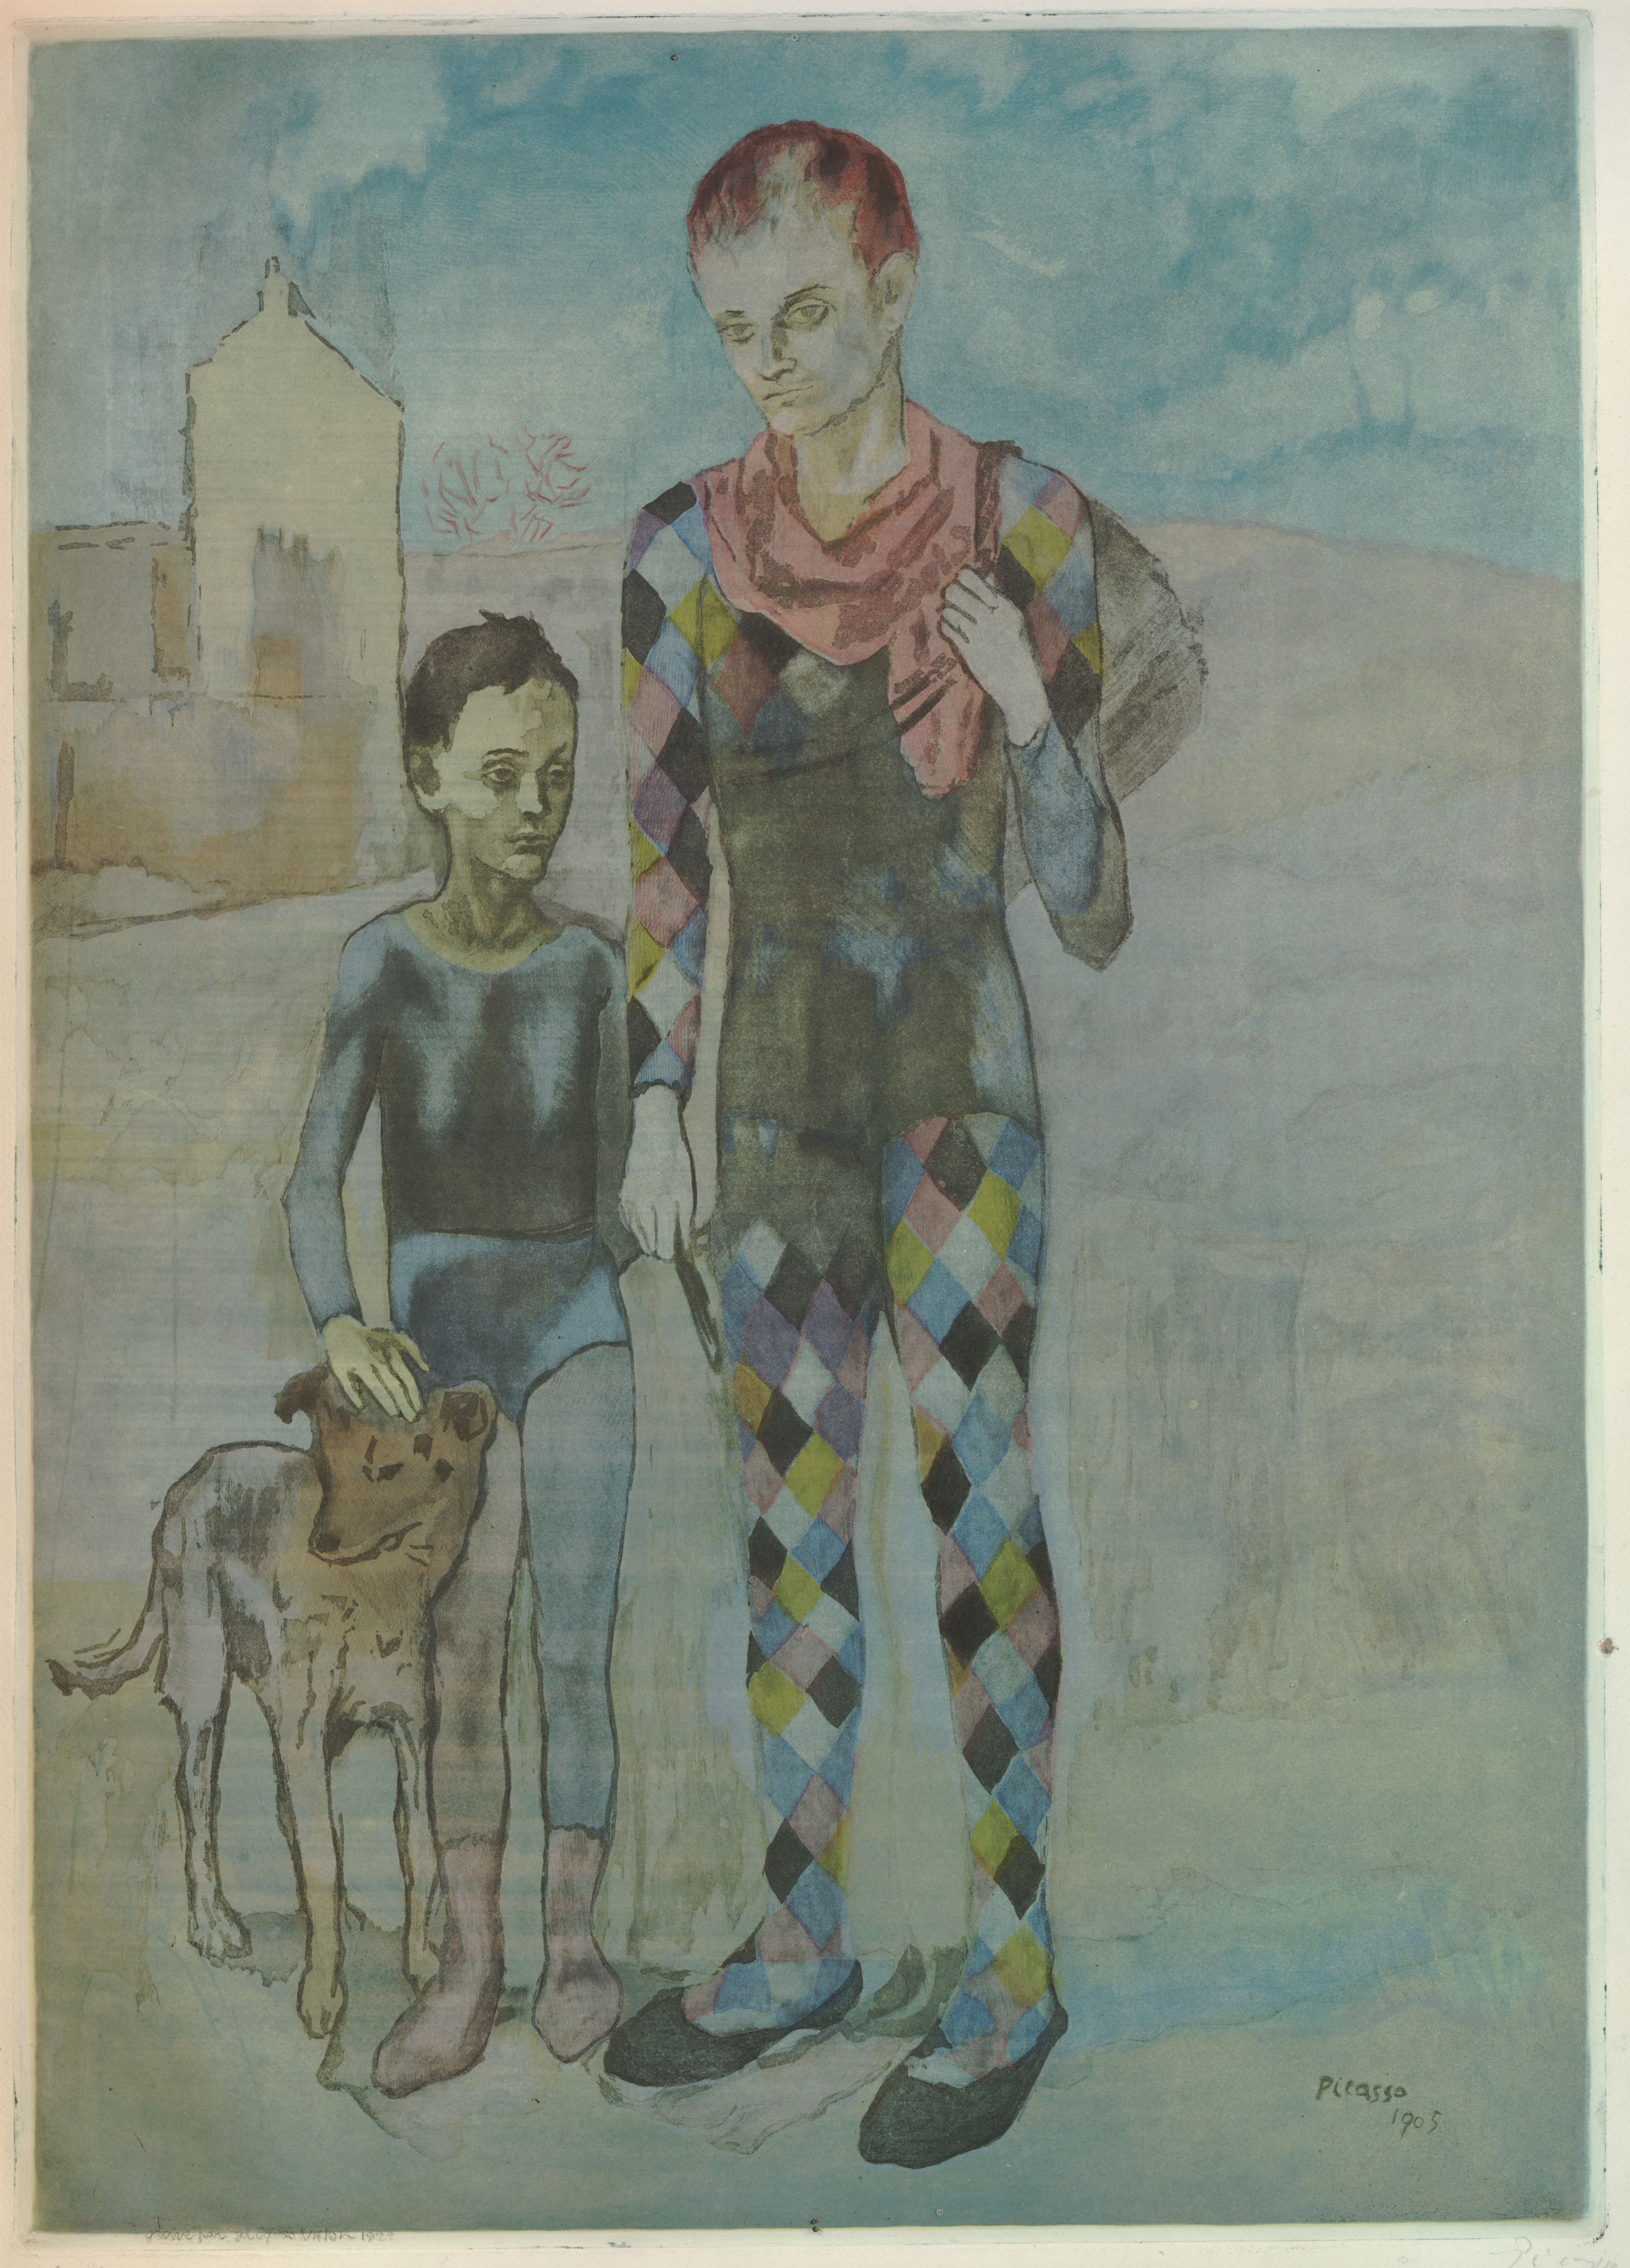 Les saltimbanques (after Picasso) (1923)